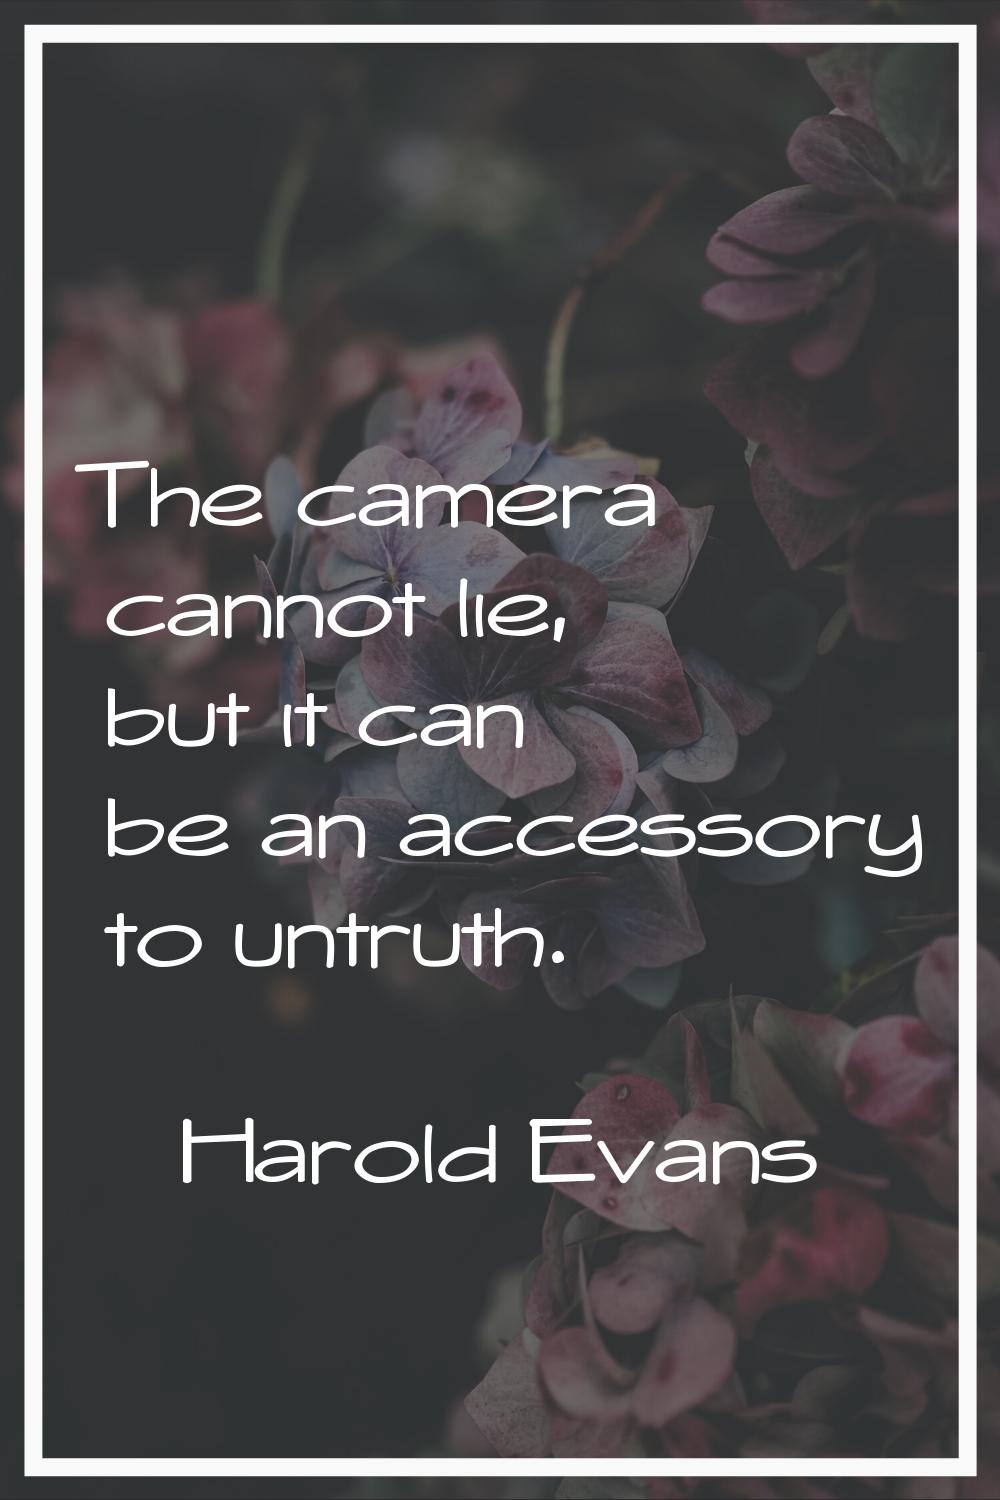 The camera cannot lie, but it can be an accessory to untruth.